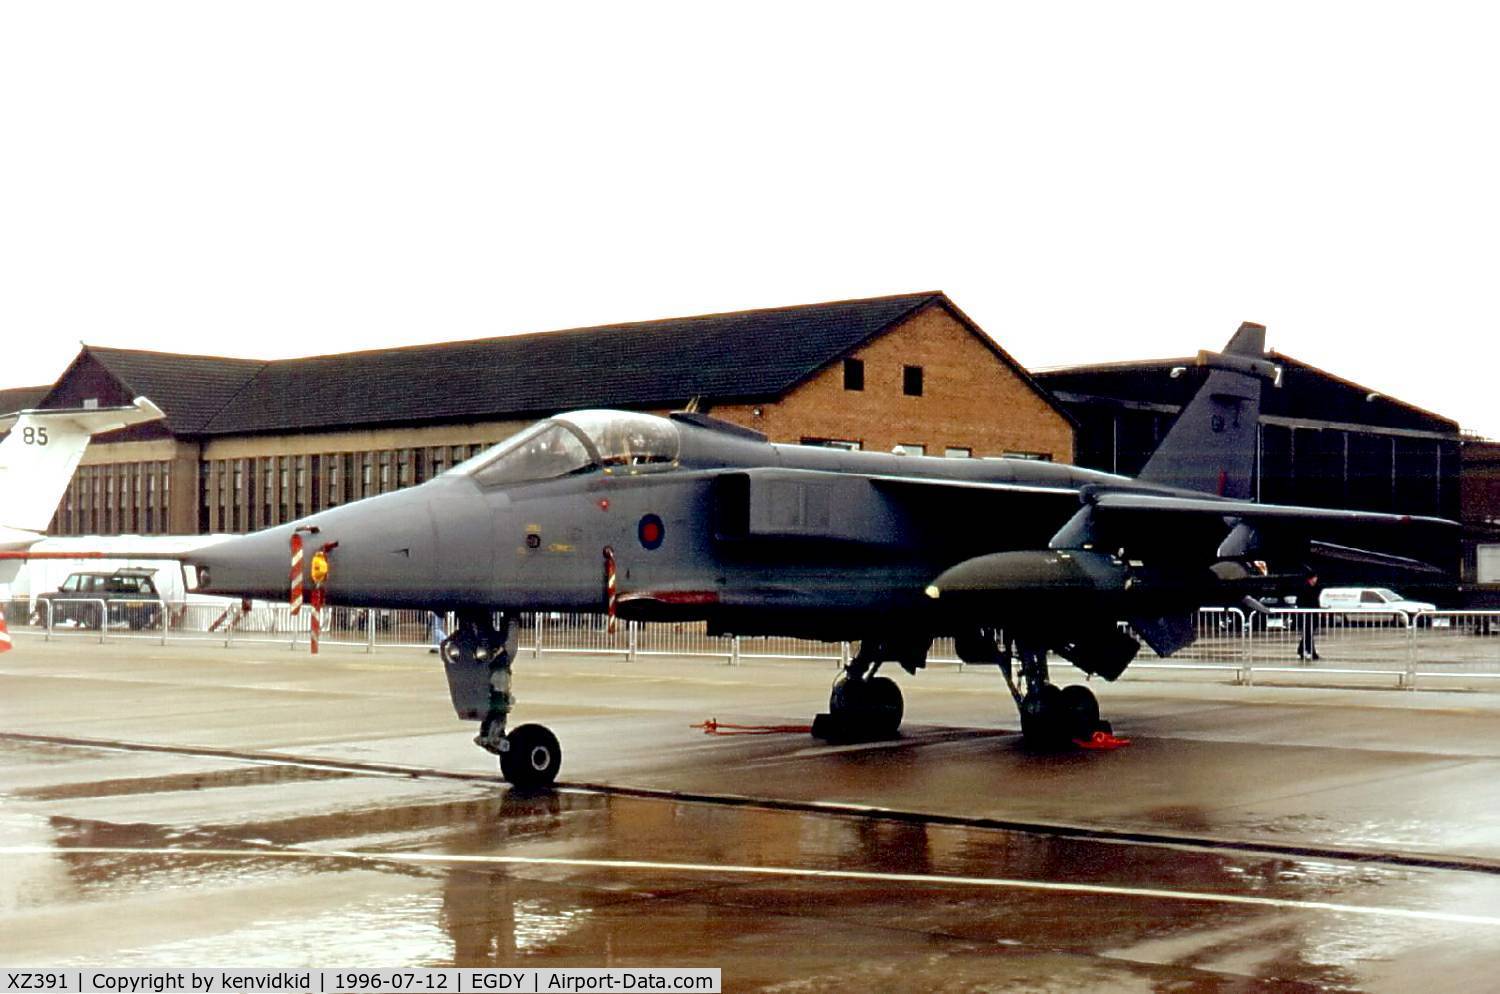 XZ391, 1977 Sepecat Jaguar GR.3 C/N S.156, At the 1996 photocall prior to the Yeovilton Air Show.